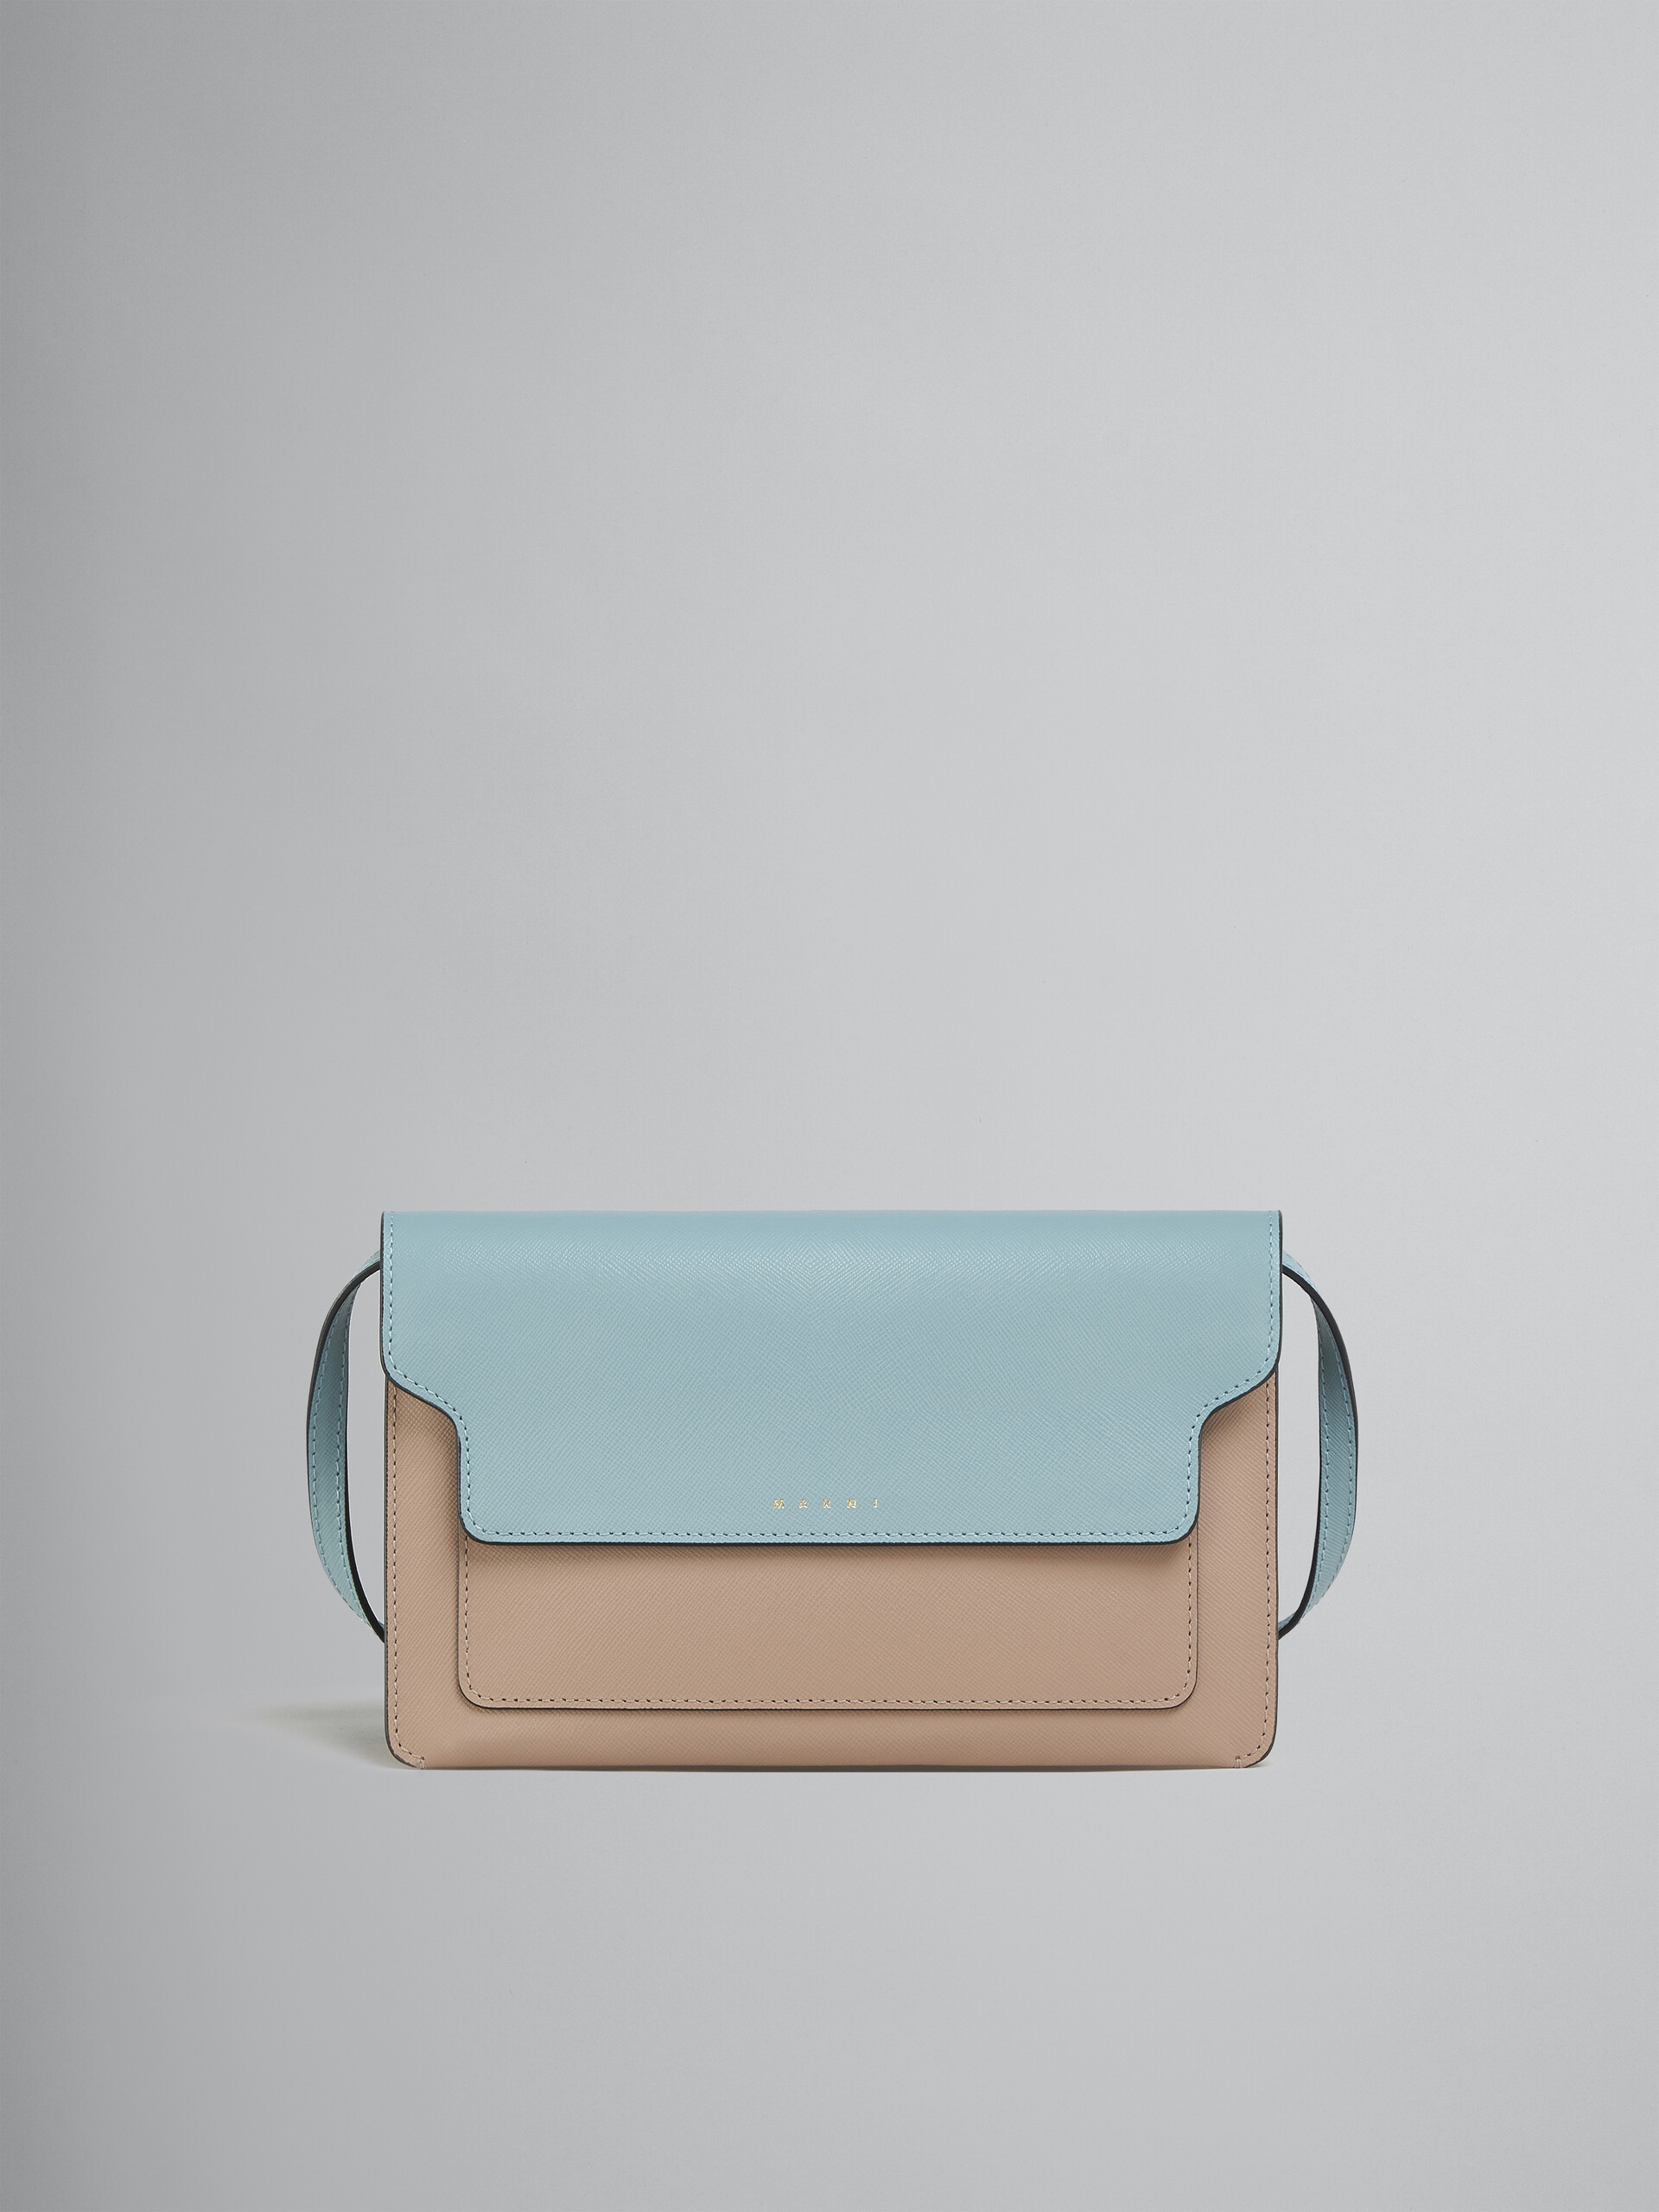 Trunk Clutch in light blue beige and white saffiano leather - Pochette - Image 1